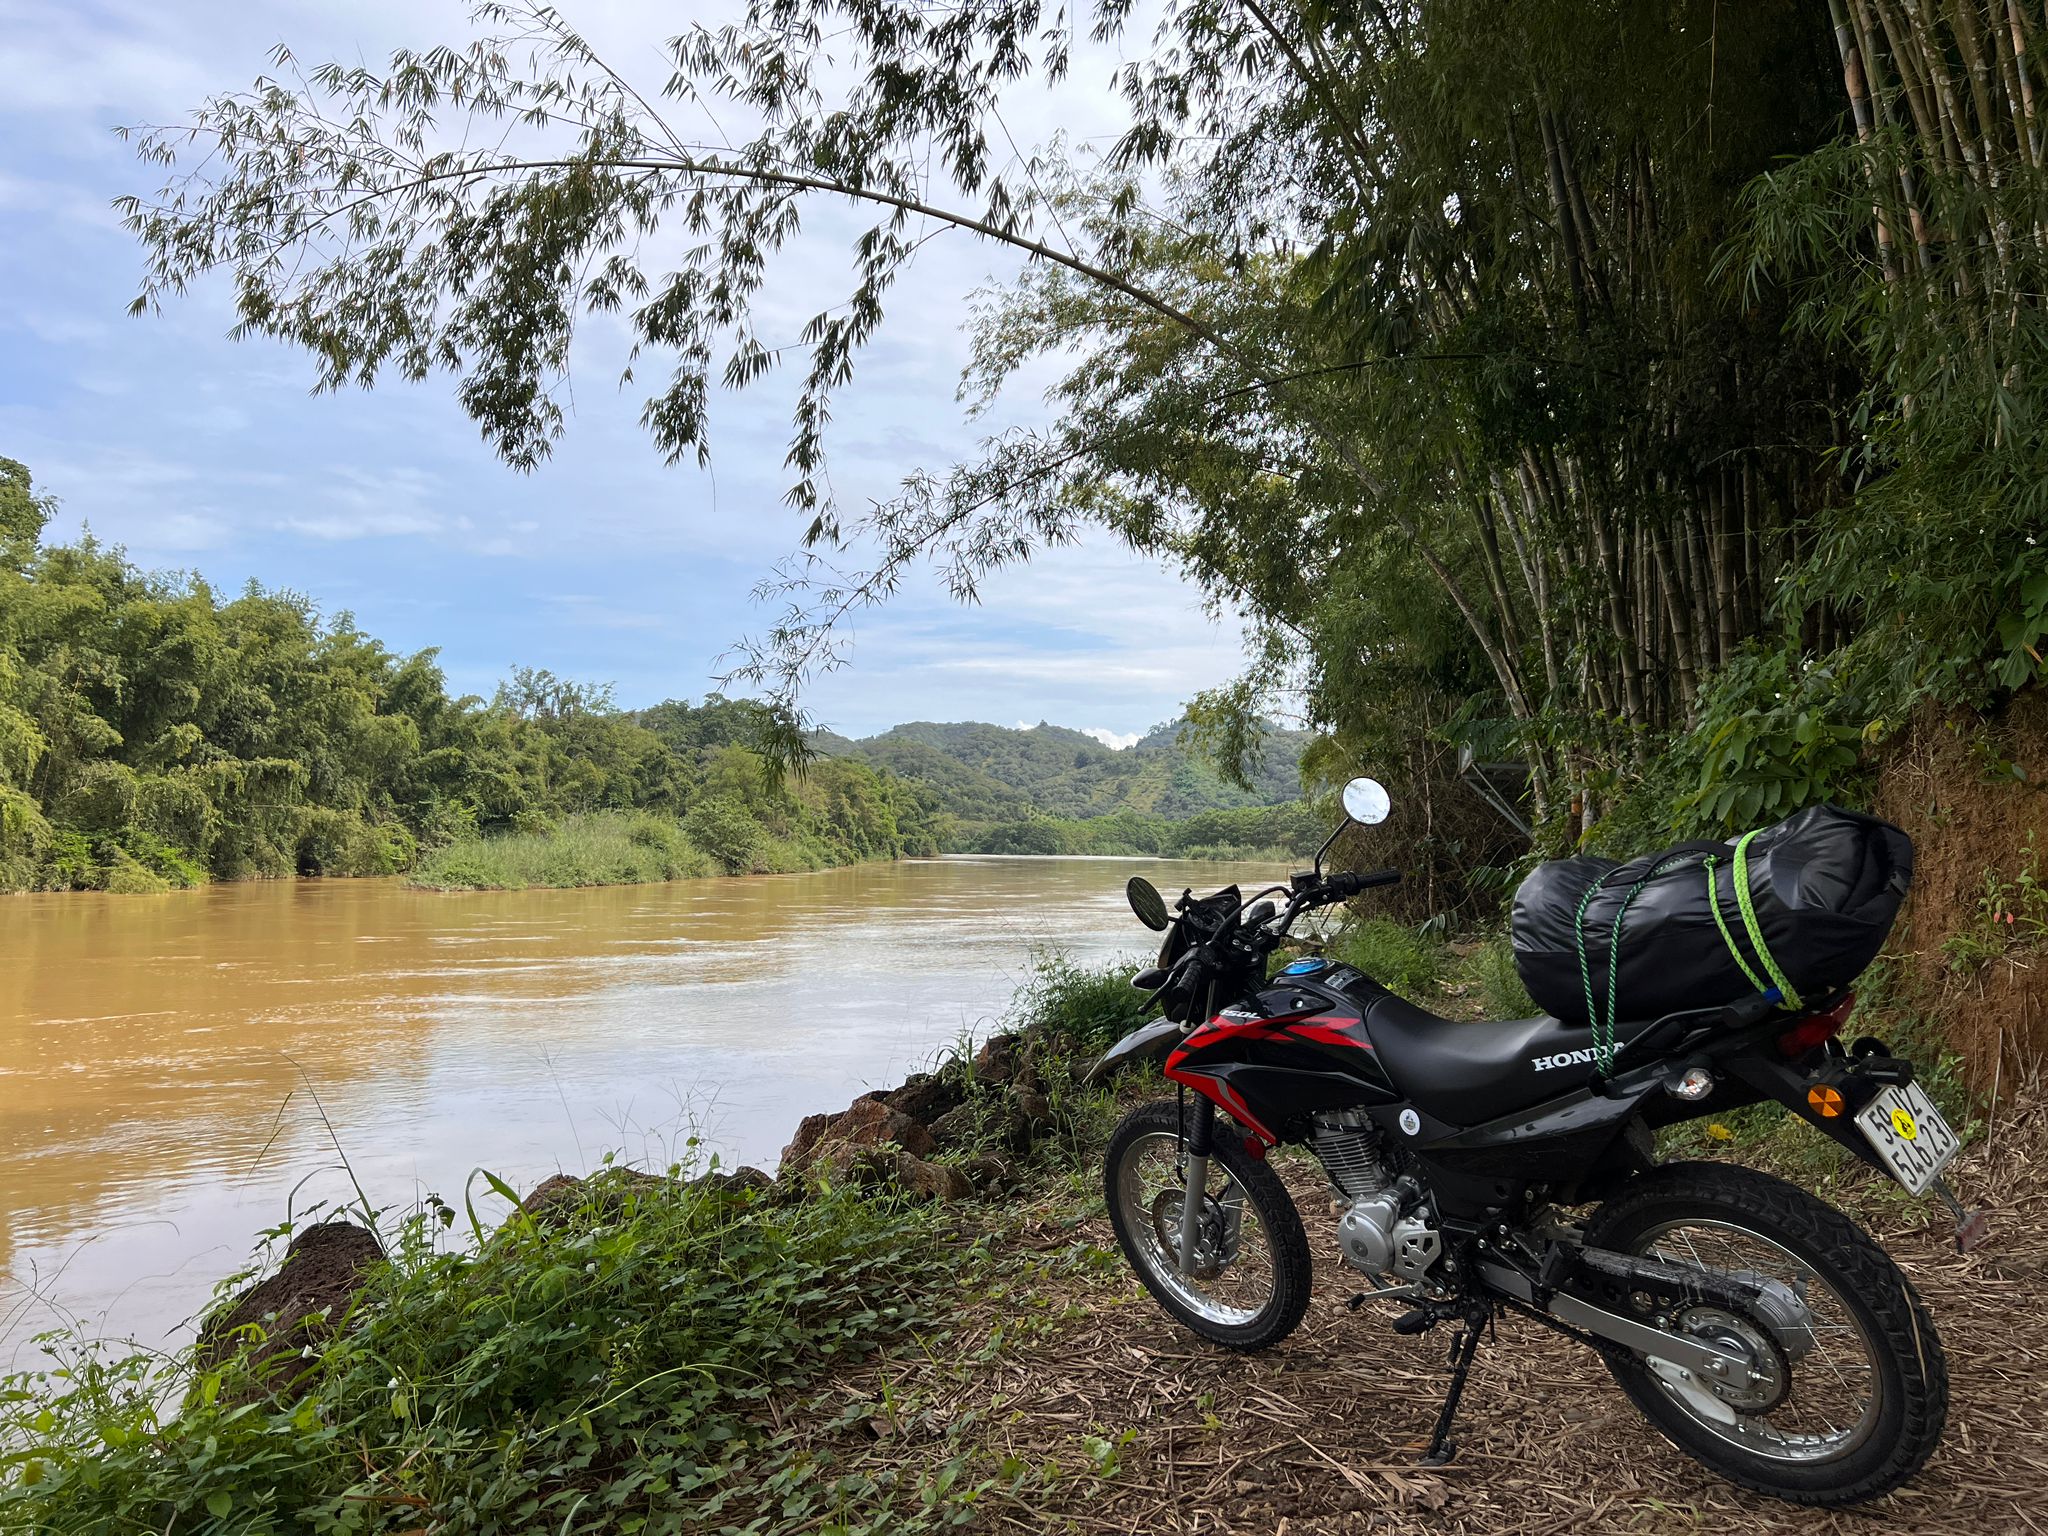 Honda XR150 parked by a river in northern Vietnam